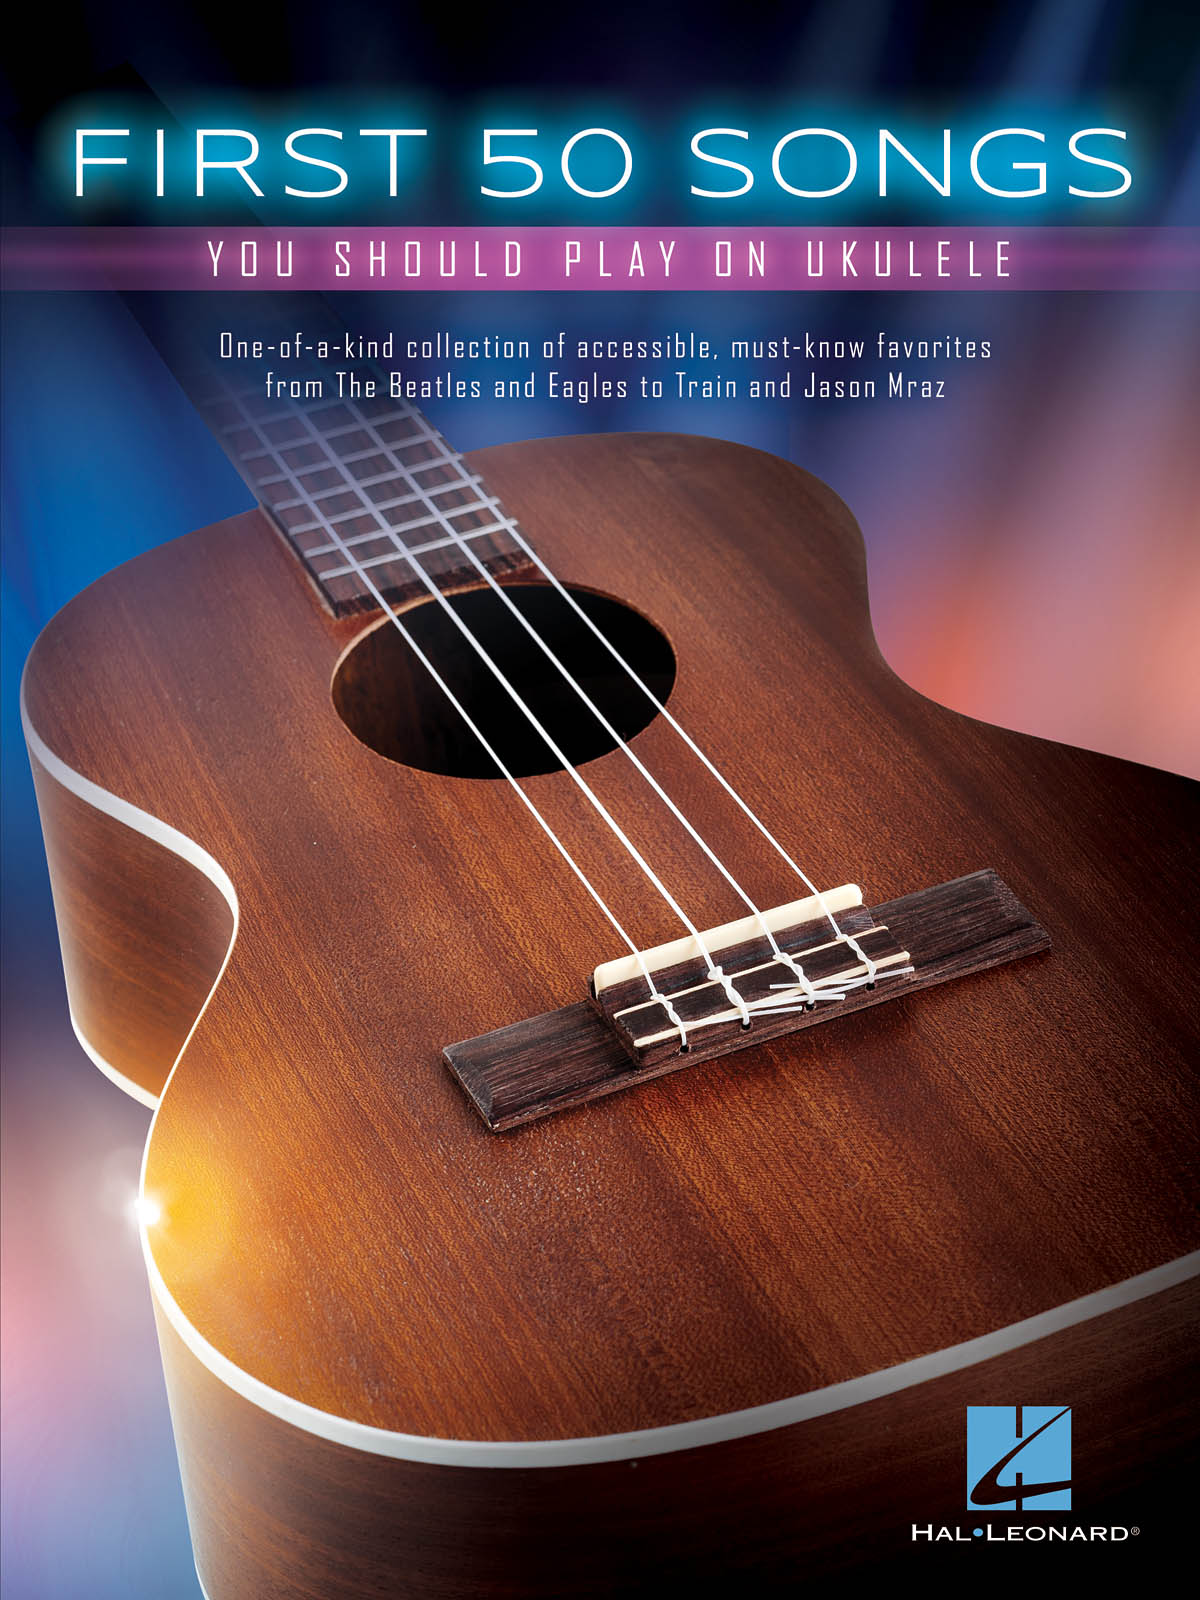 First 50 Songs You Should Play on Ukulele - One-of-a-kind collection of accessible, must-know favorites noty pro ukulele